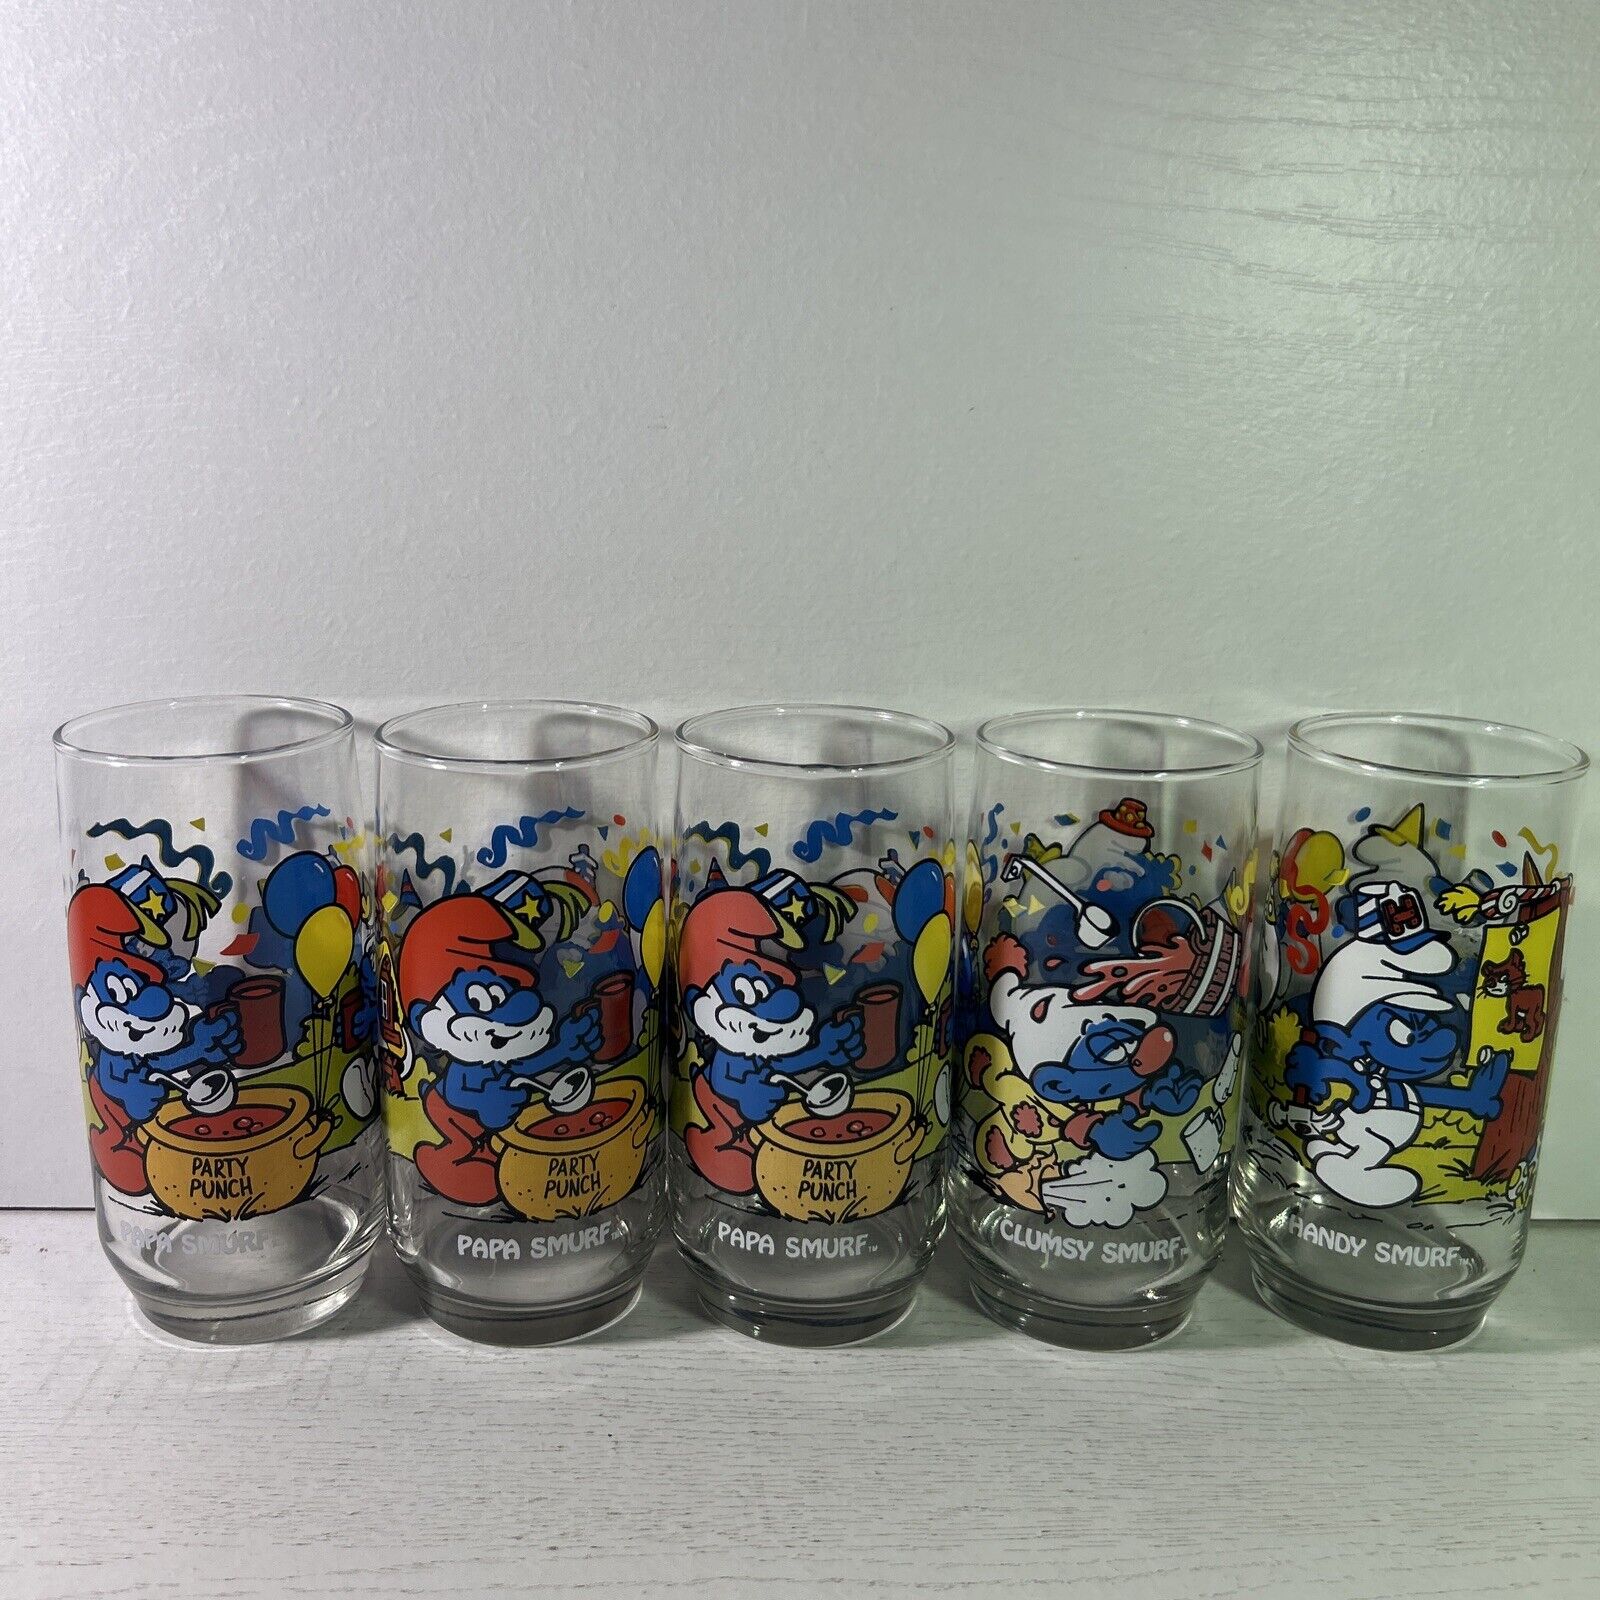 Lot of 5 Vintage Hardee's Peyo Smurf Glasses 1982/1983 Wallace Berry